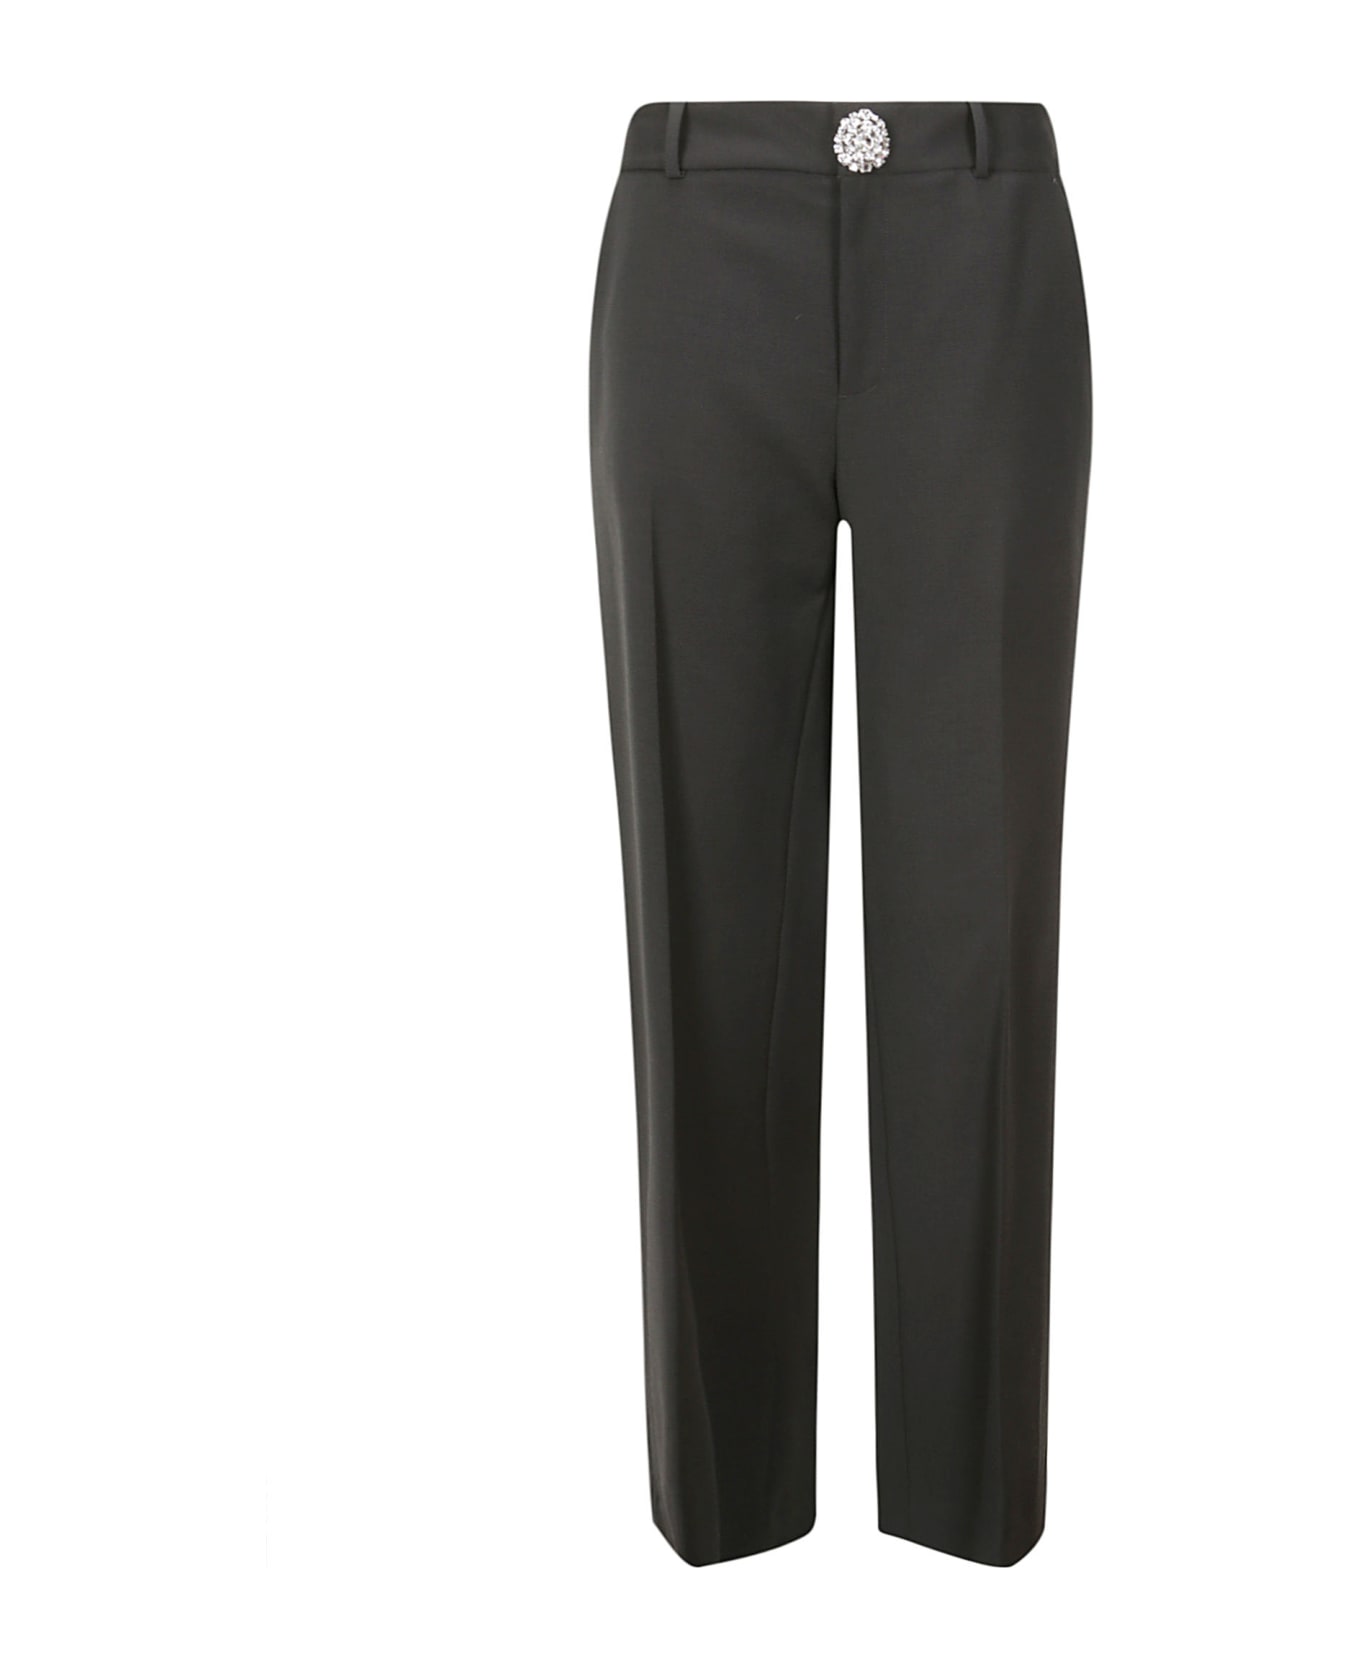 AREA Crystal Button Slit Trouser - CHARCOAL